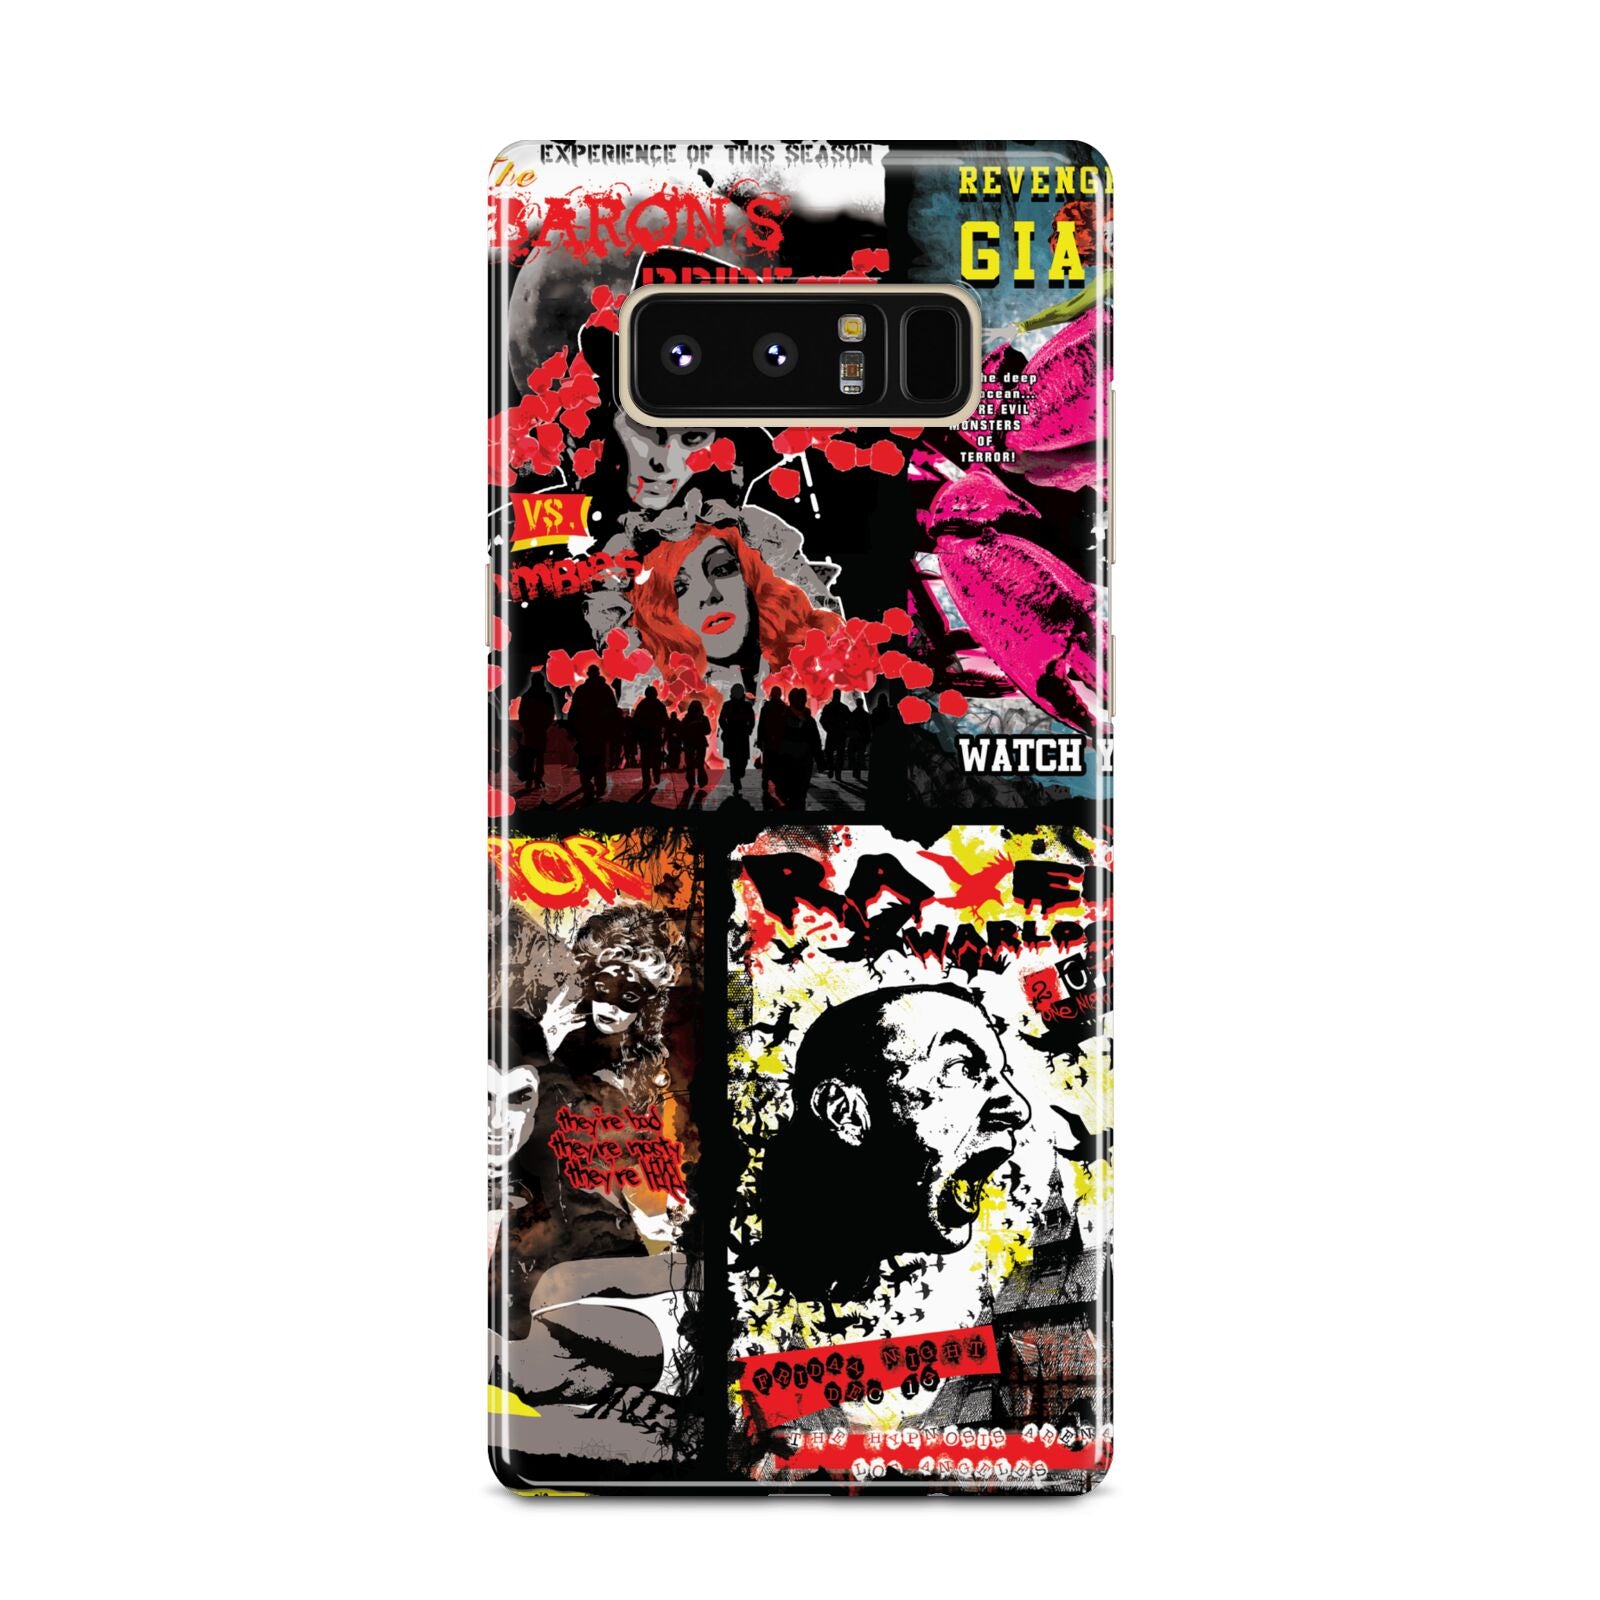 B Movie Posters Samsung Galaxy Note 8 Case